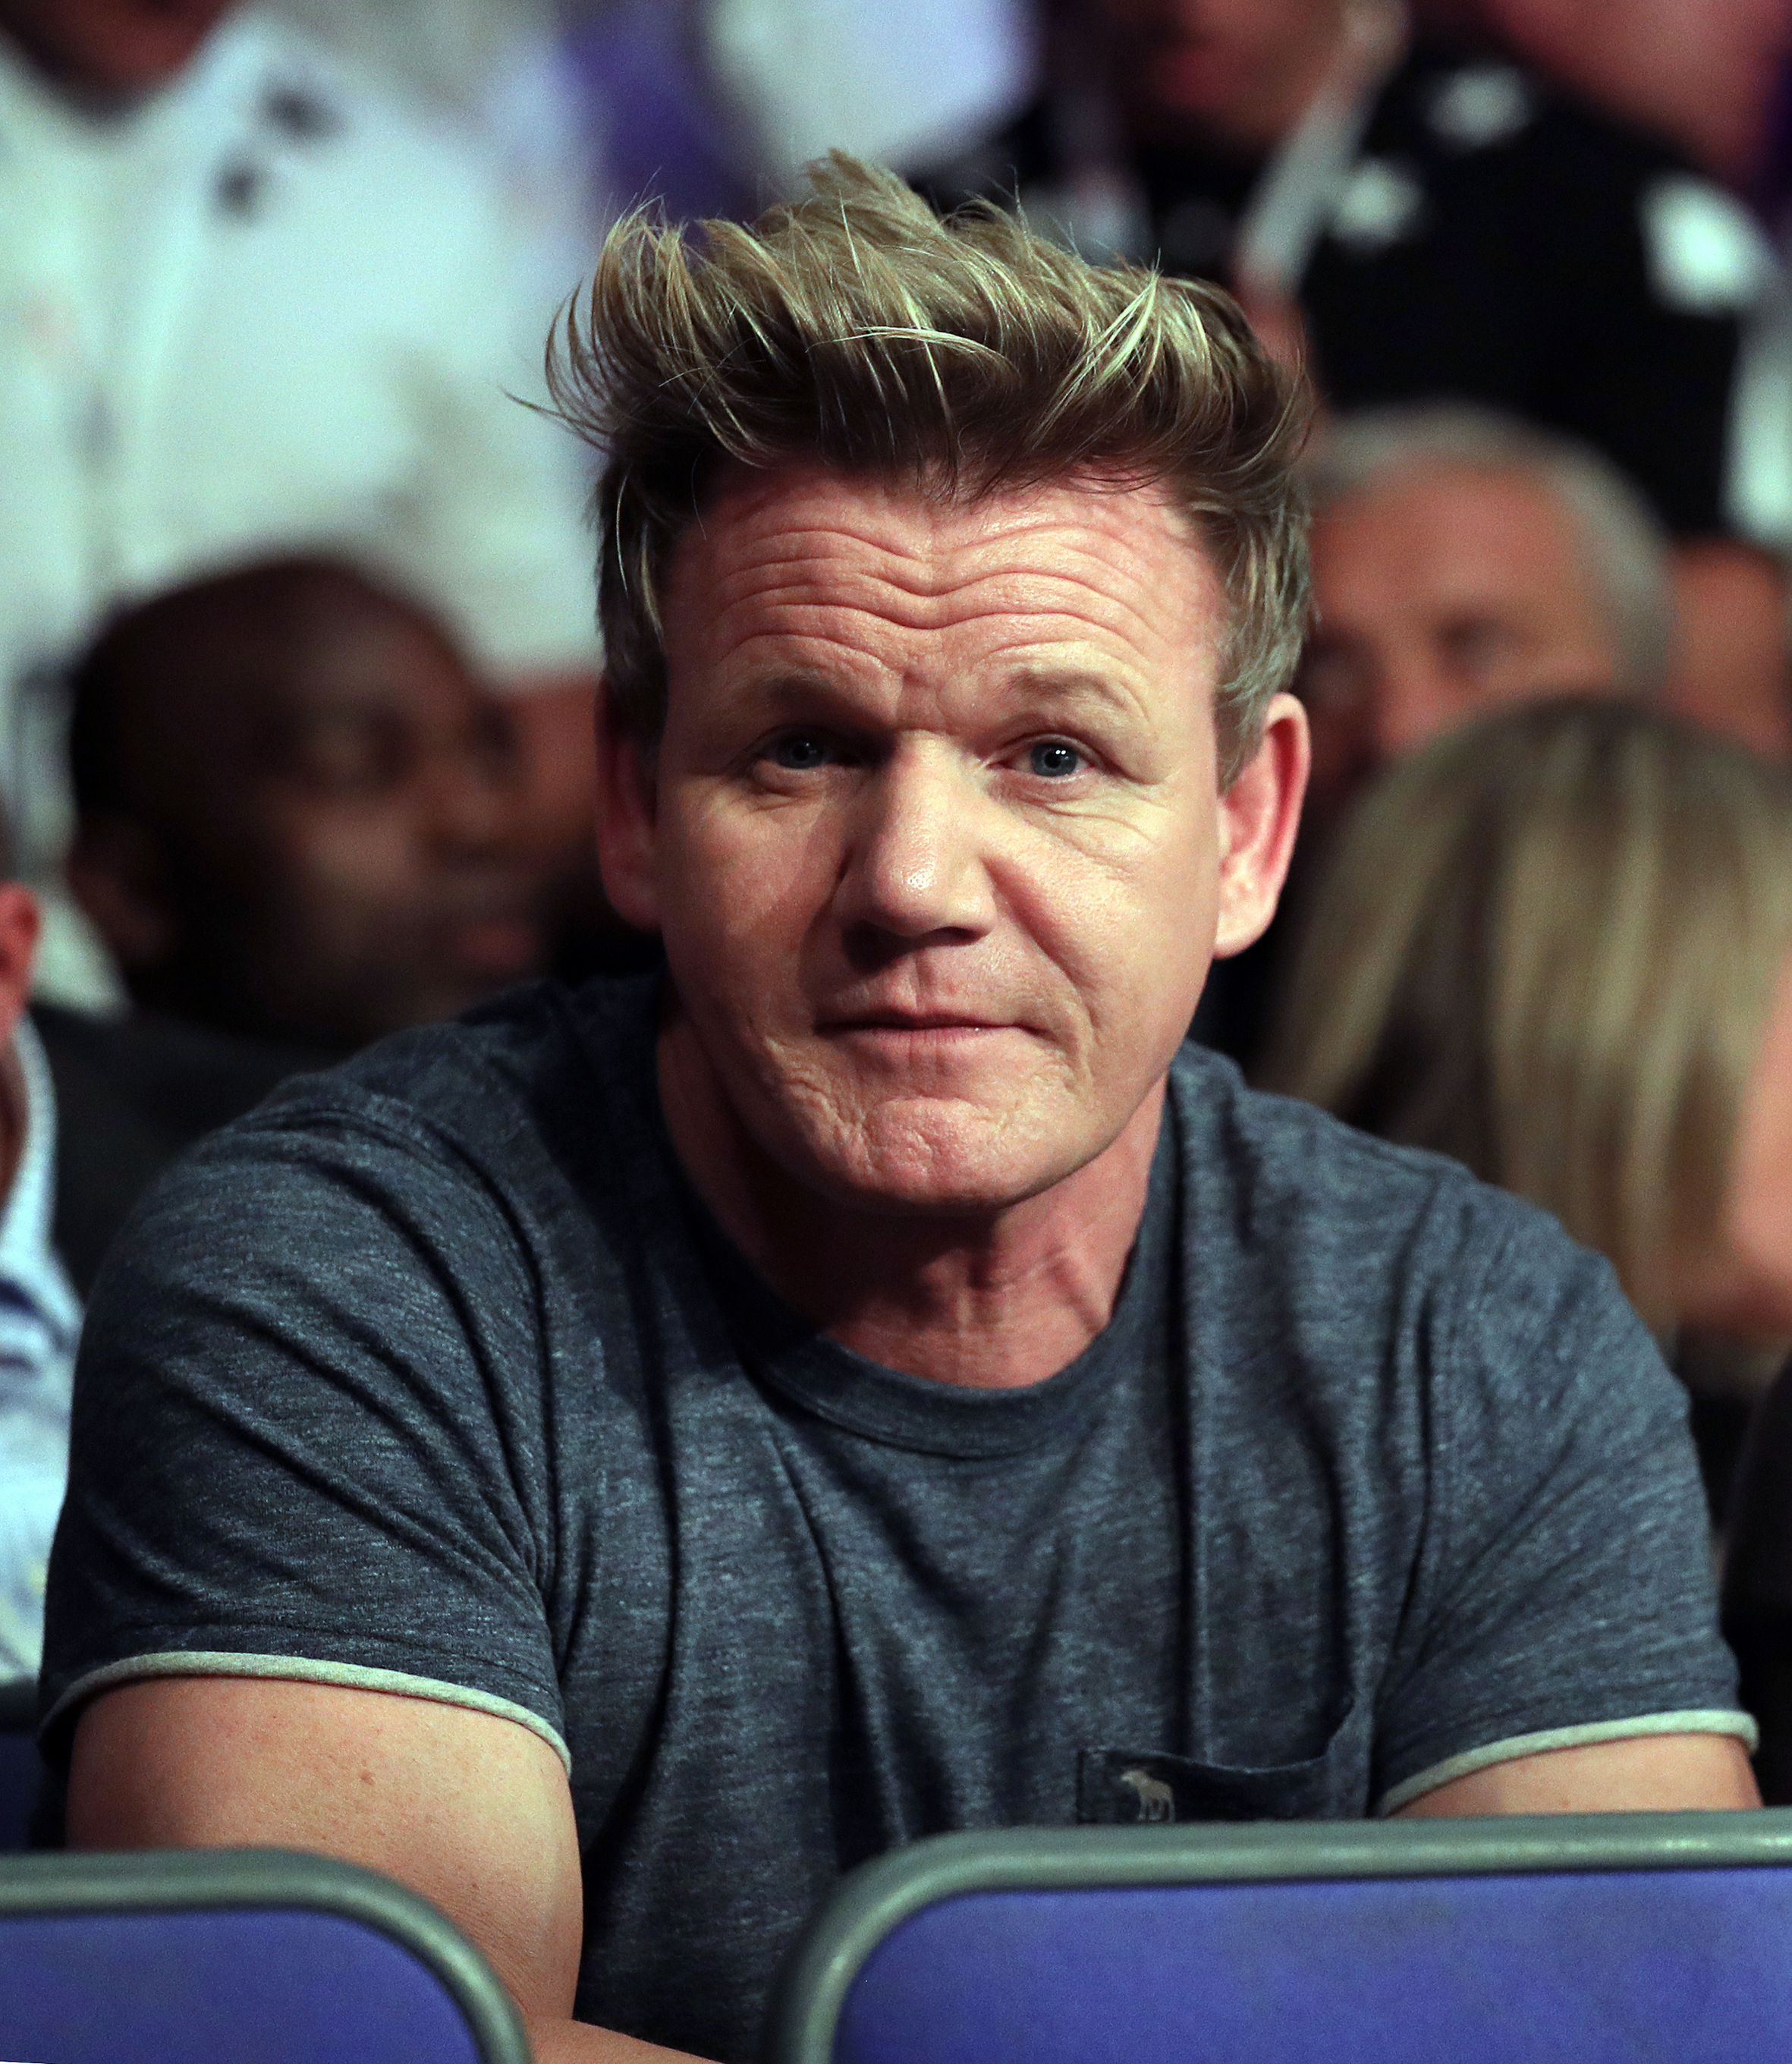 Eating and drinking: Gordon Ramsay to open a new restaurant in Edinburgh